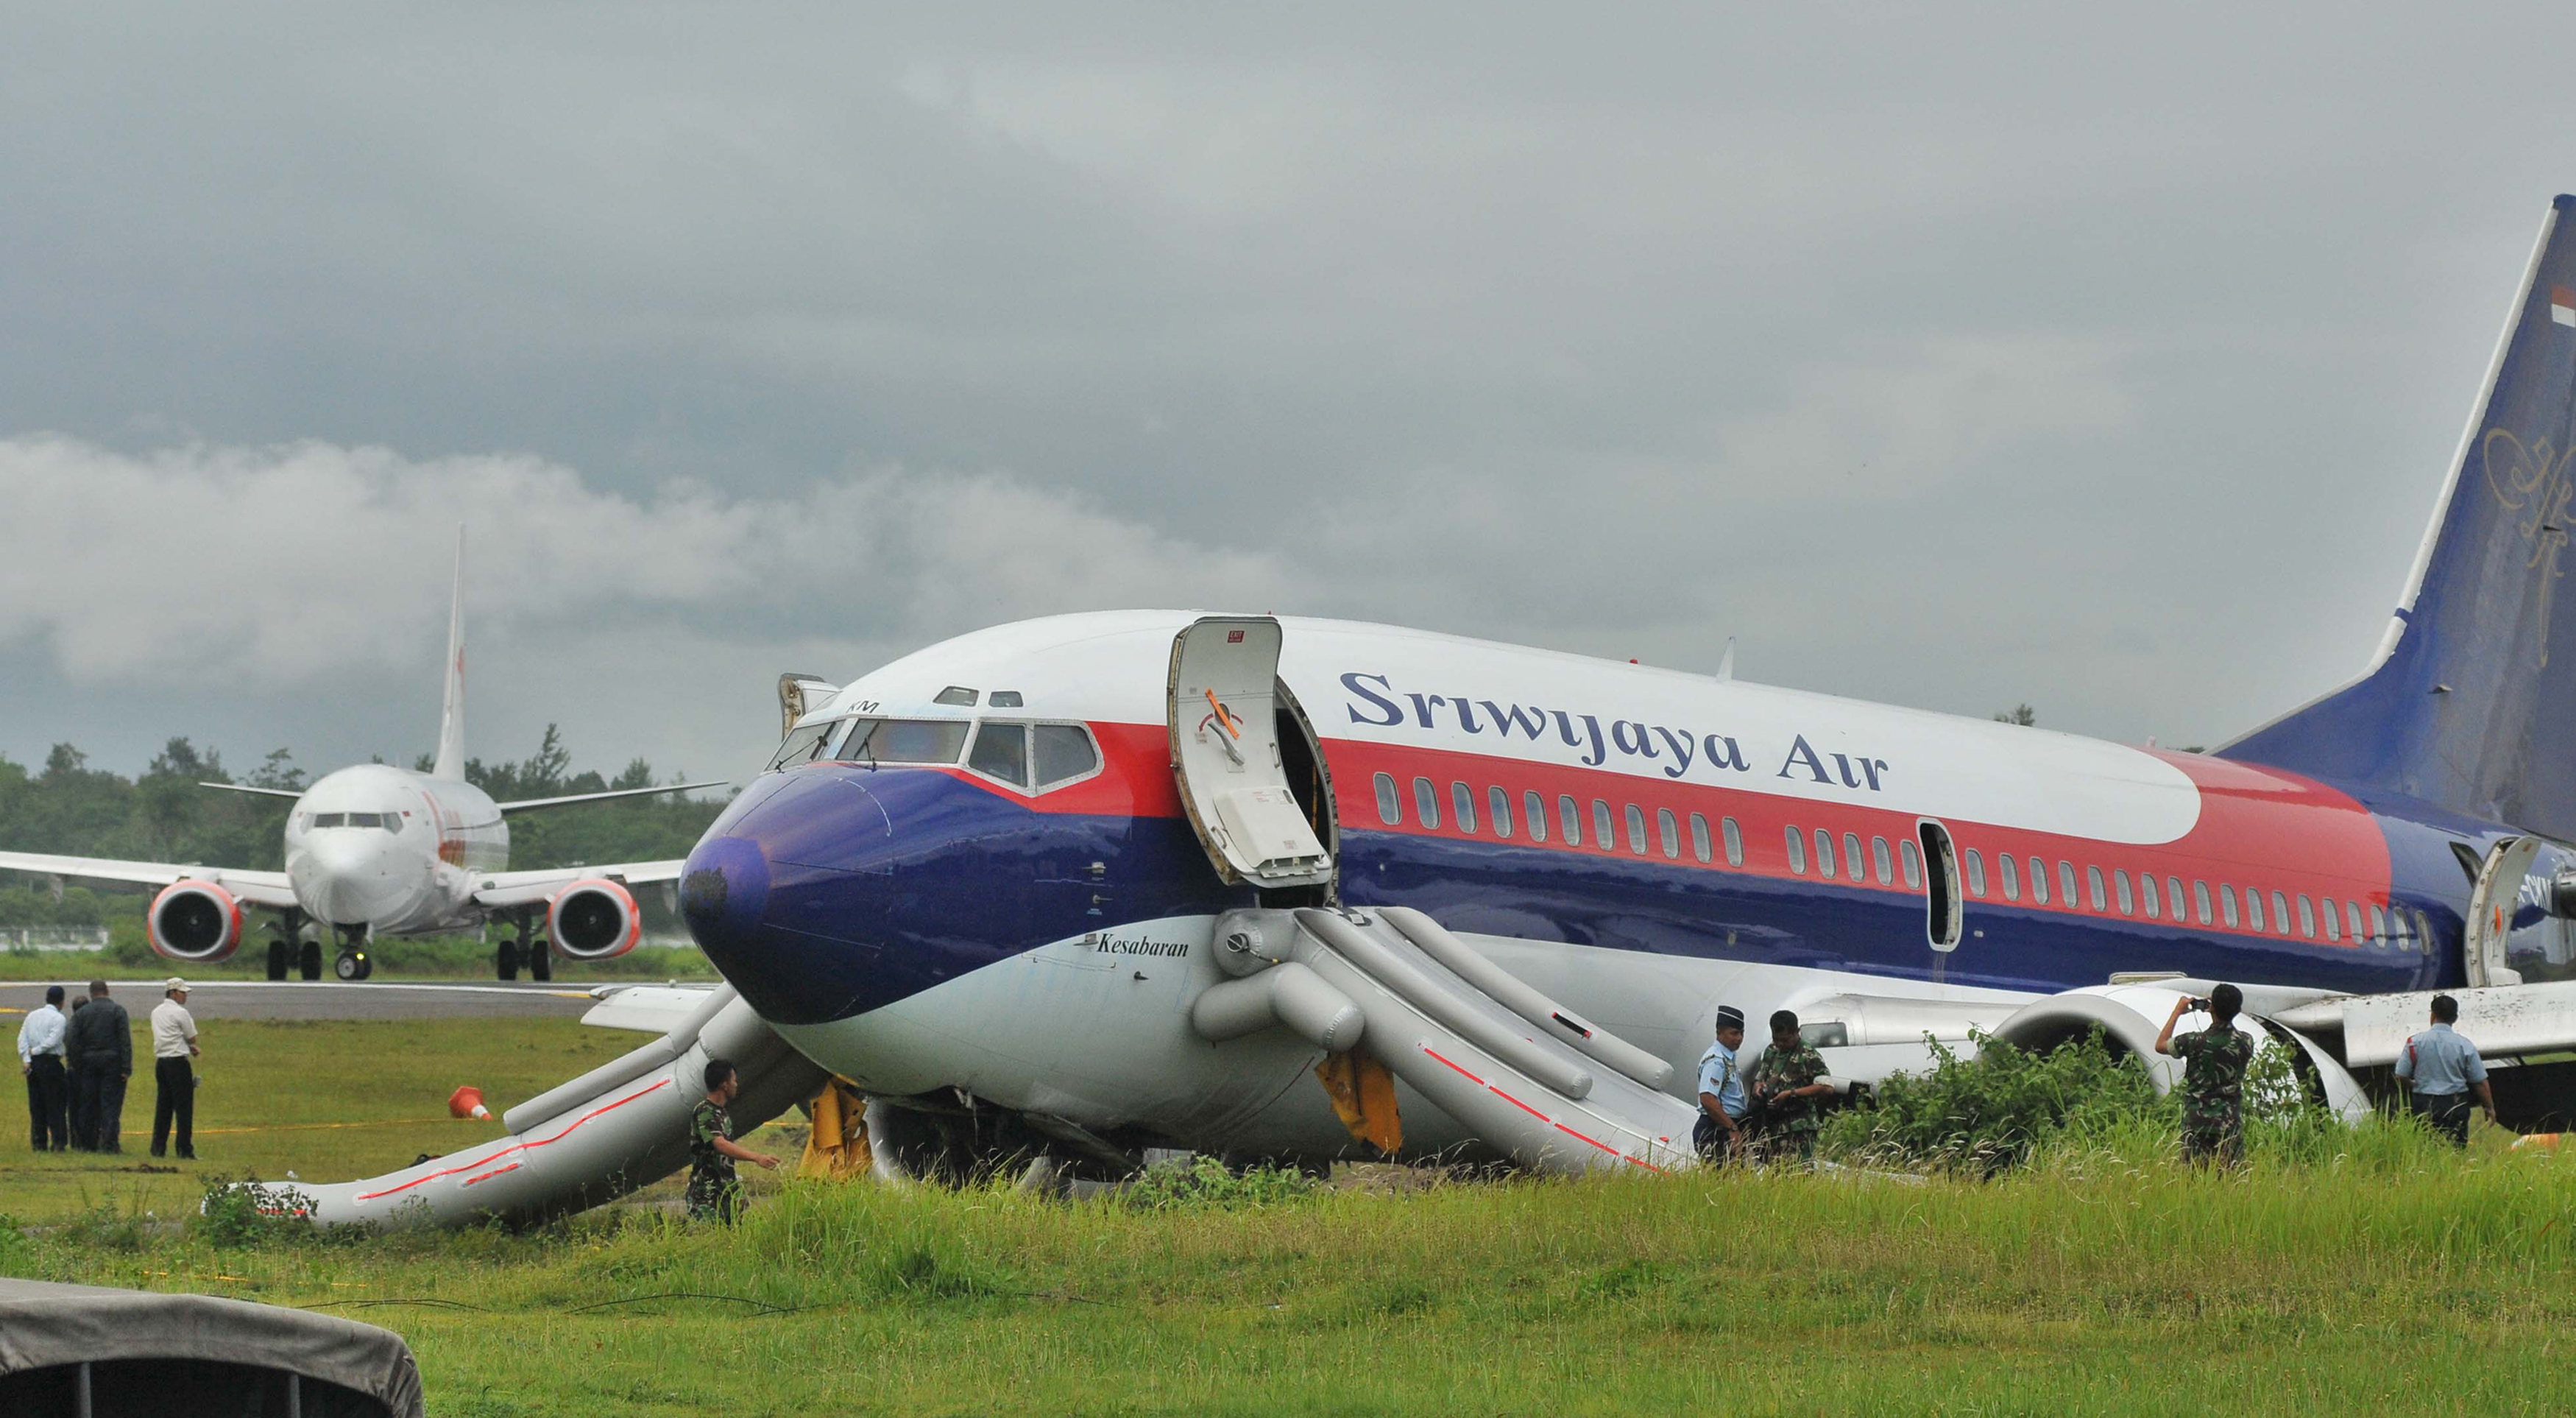 This Sriwijaya Air Boeing 737-300 aircraft, carrying 129 passengers, skidded off the runway during landing on Dec. 21, 2011. (AFP PHOTO BY CLARA PRIMA)